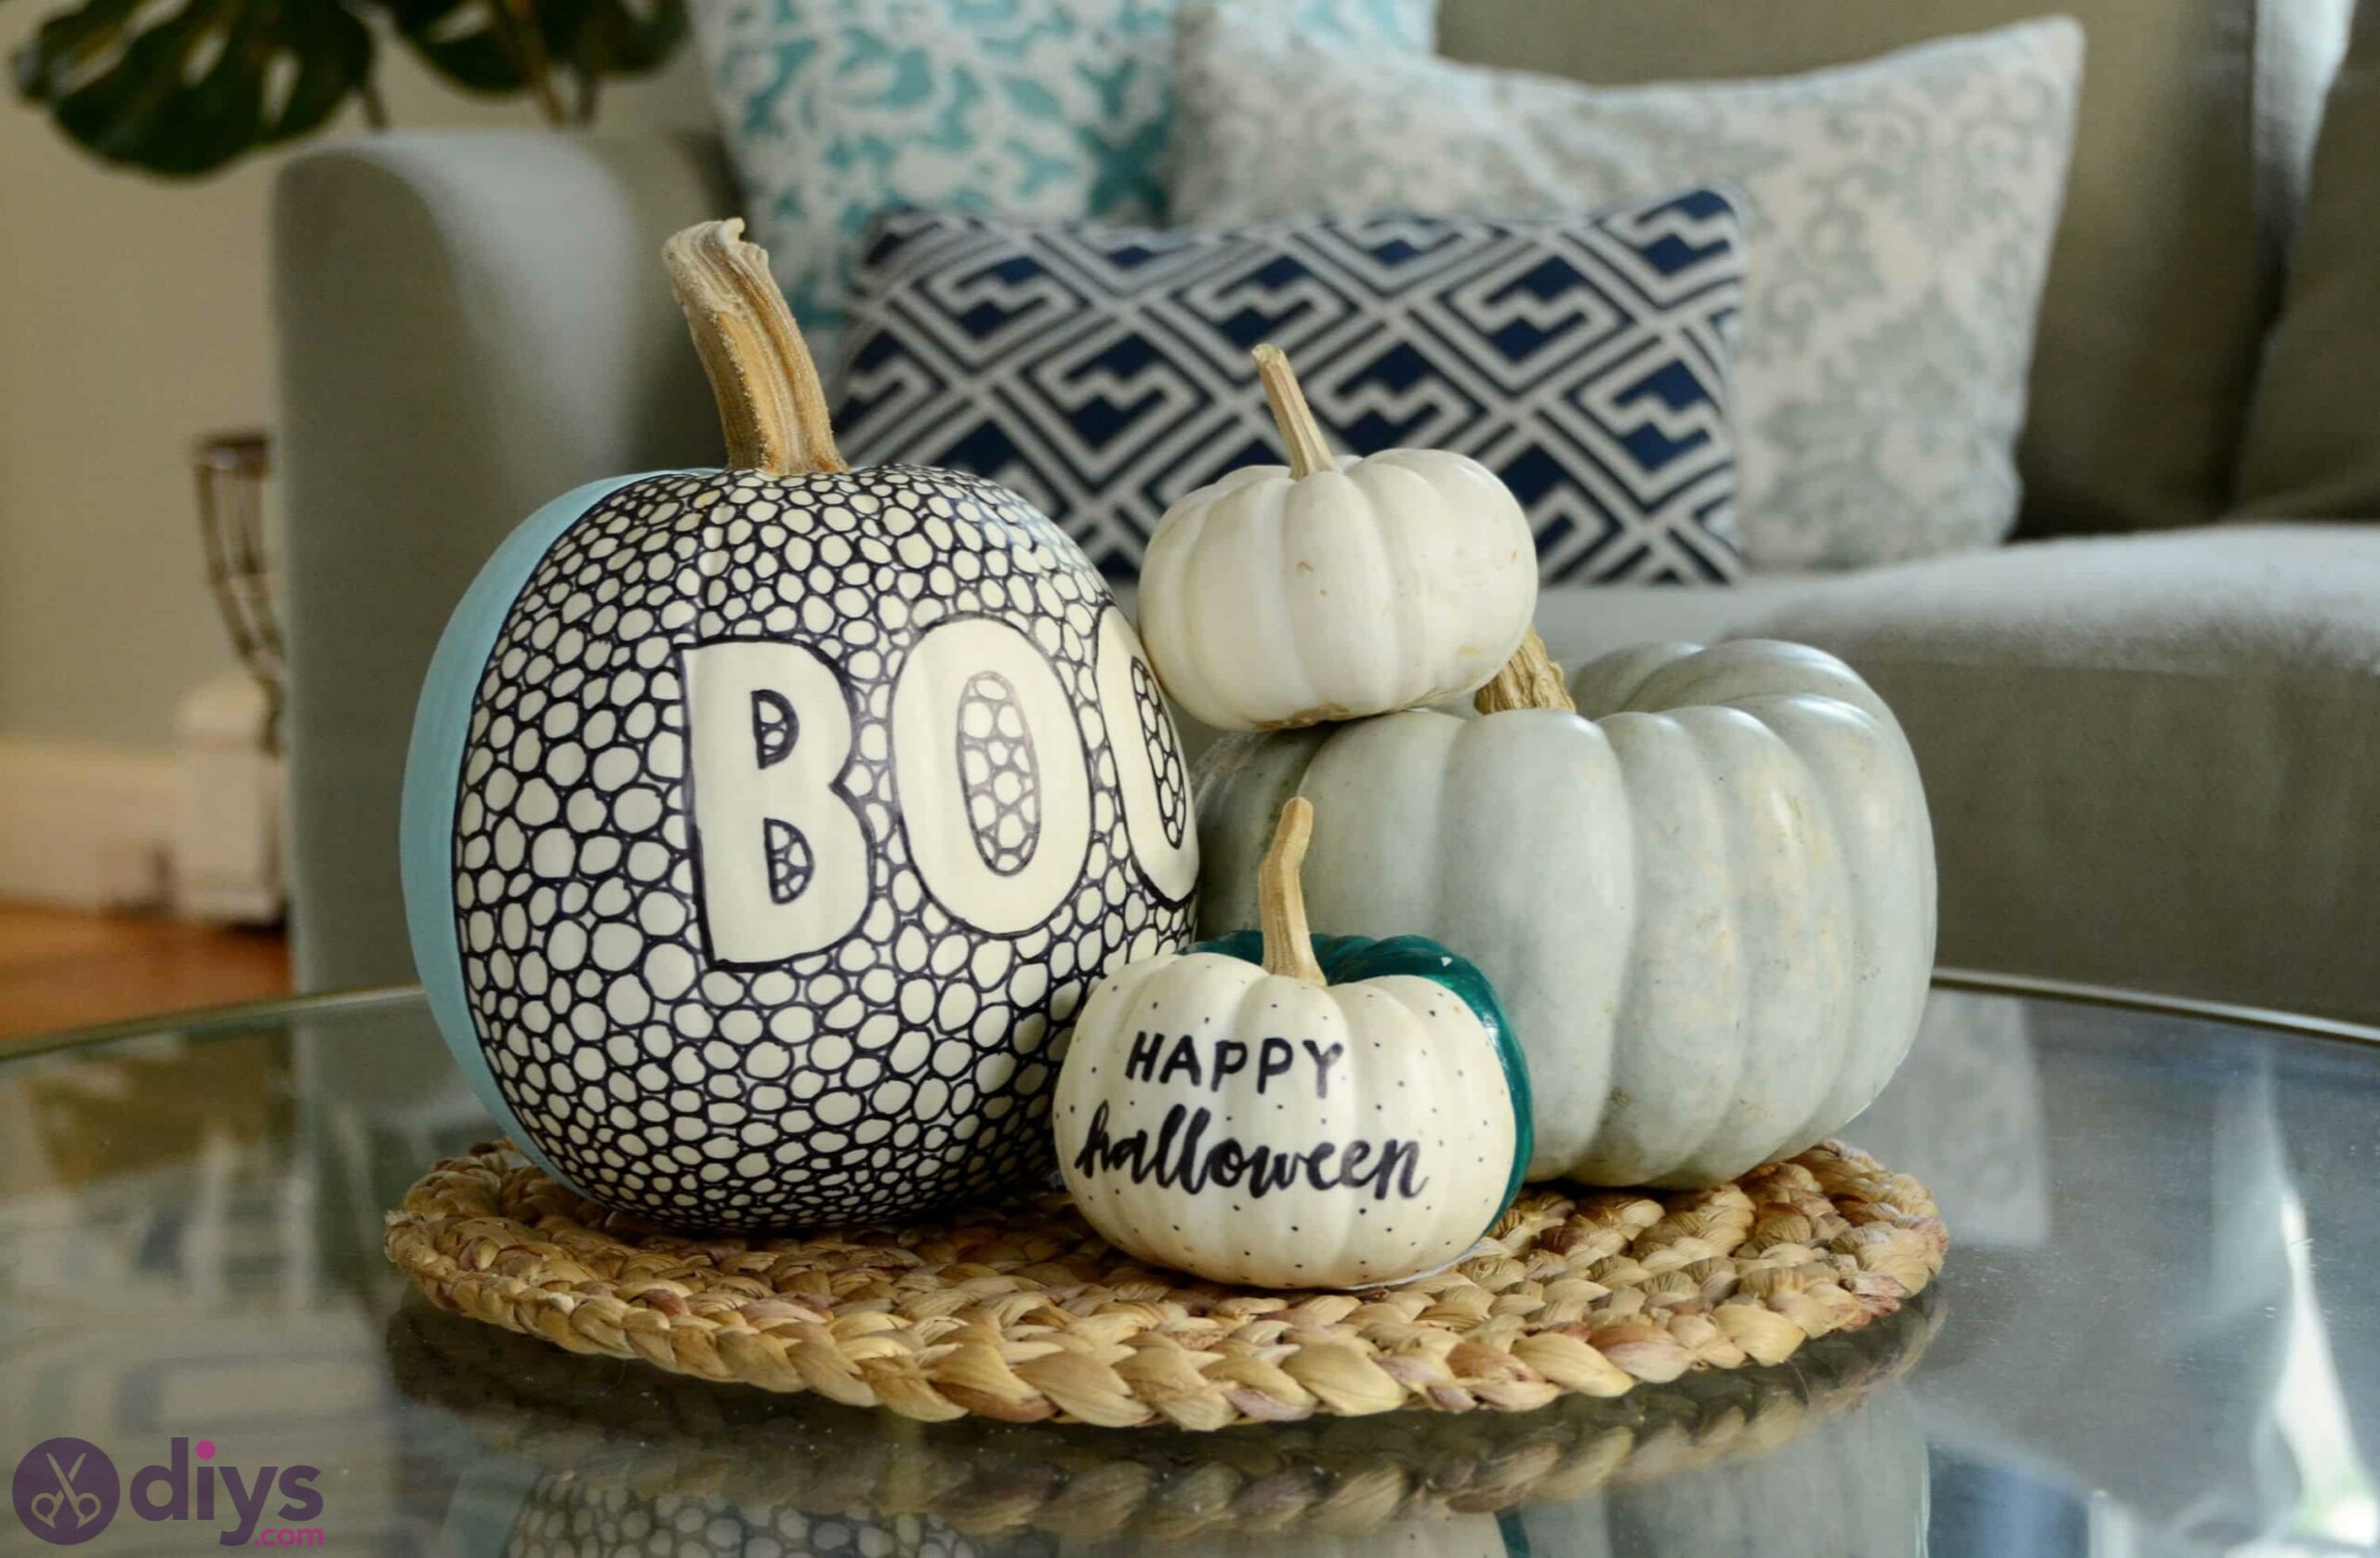 Black and white patterned pumpkin halloween decorations 